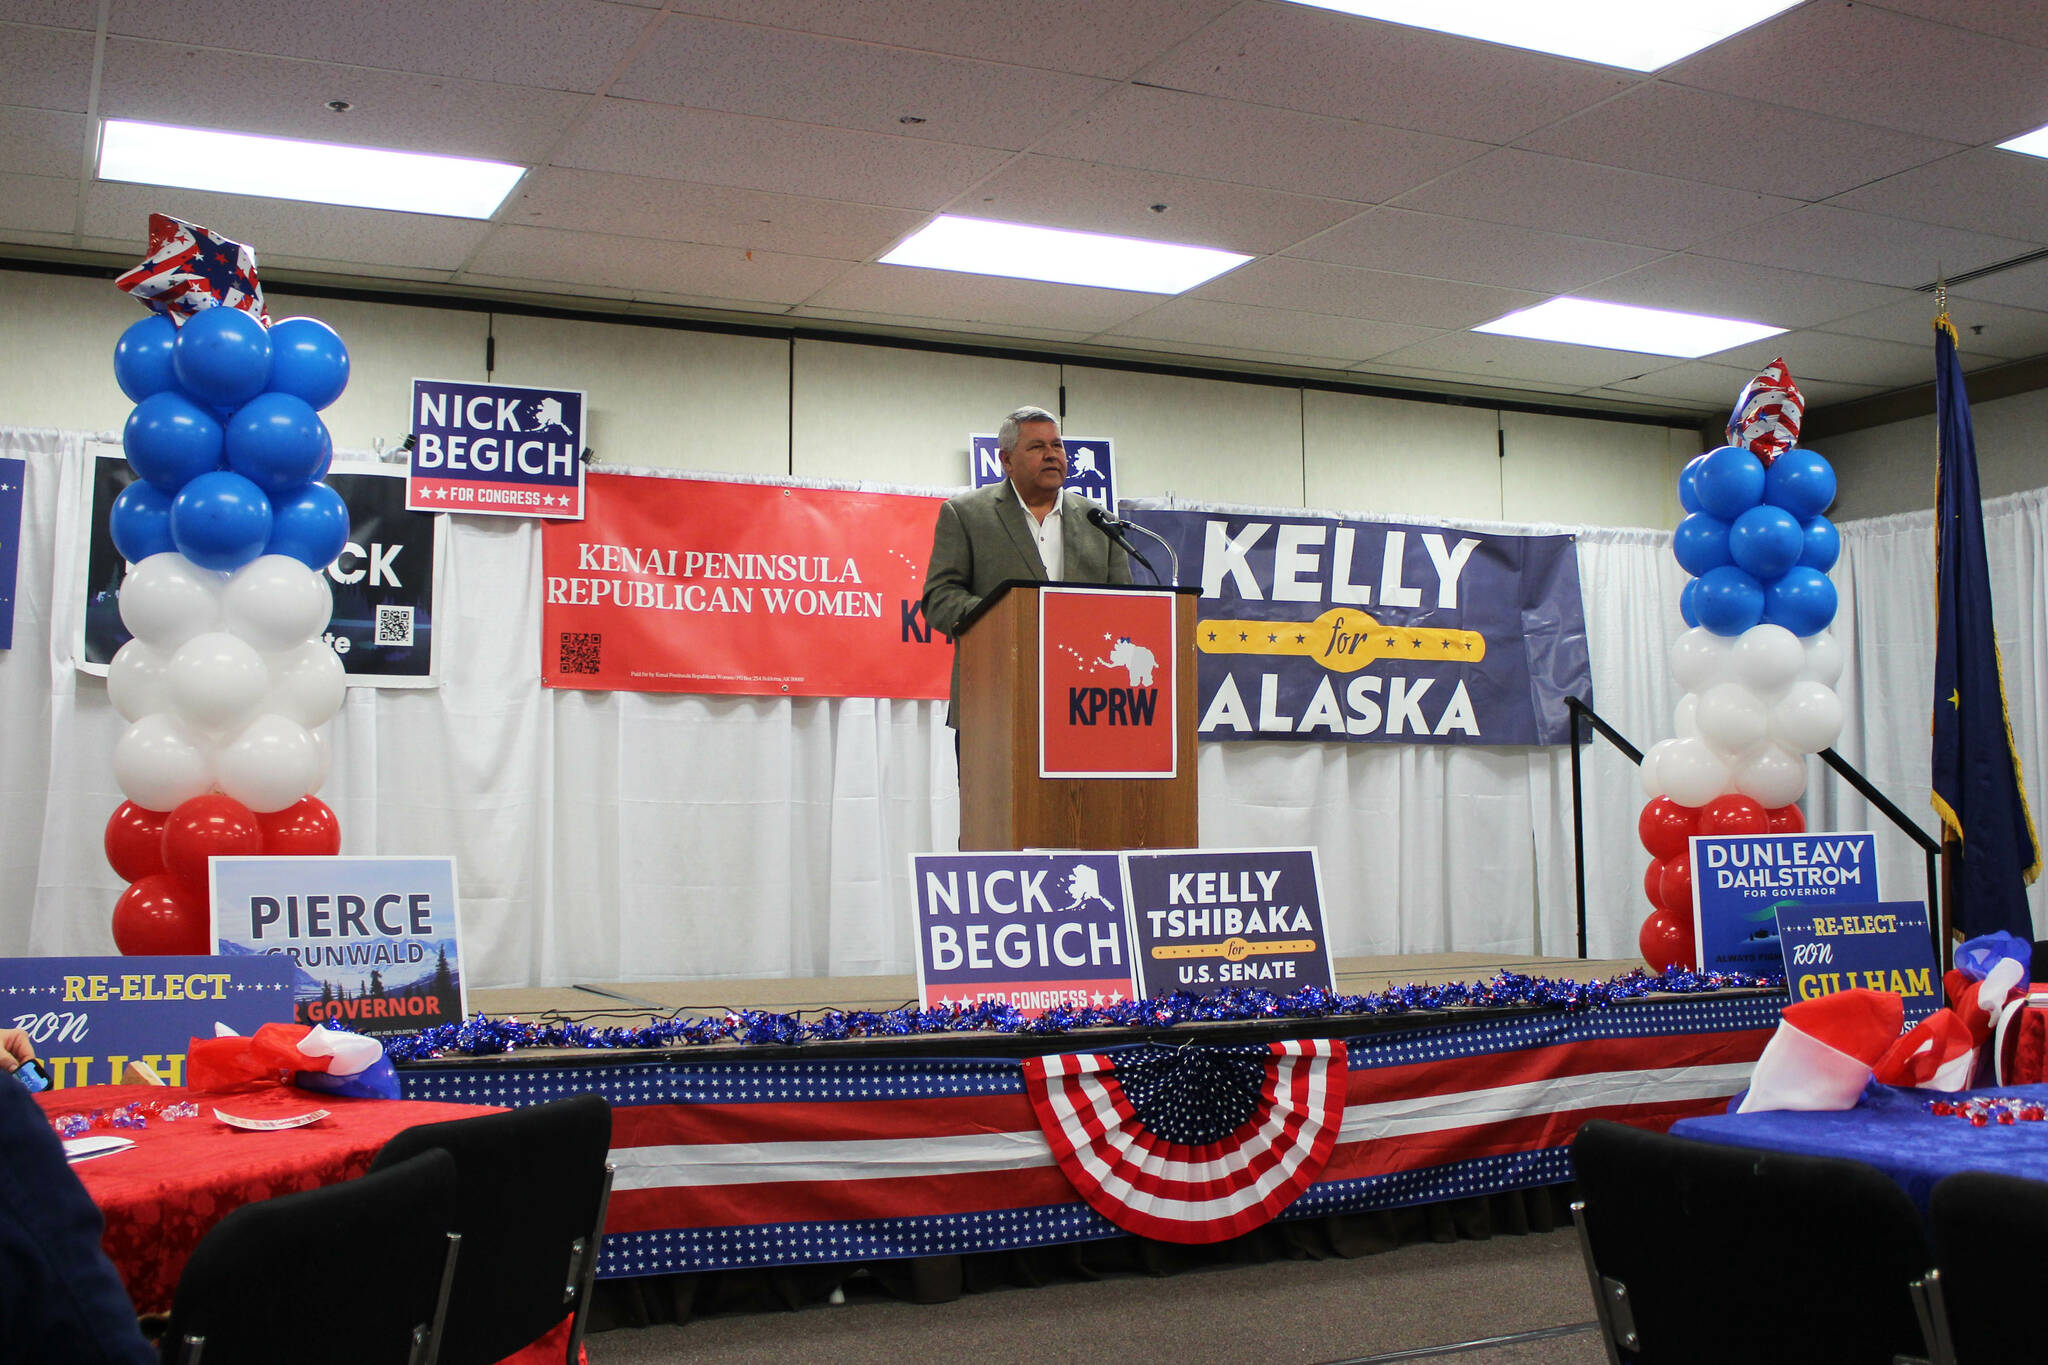 Former Kenai Peninsula Borough Mayor and current Alaska gubernatorial candidate Charlie Pierce speaks at a “Get Out the Vote” rally hosted by the Kenai Peninsula Republican Women at the Soldotna Regional Sports Complex on Tuesday, Oct. 18, 2022, in Soldotna, Alaska. (Ashlyn O’Hara/Peninsula Clarion)